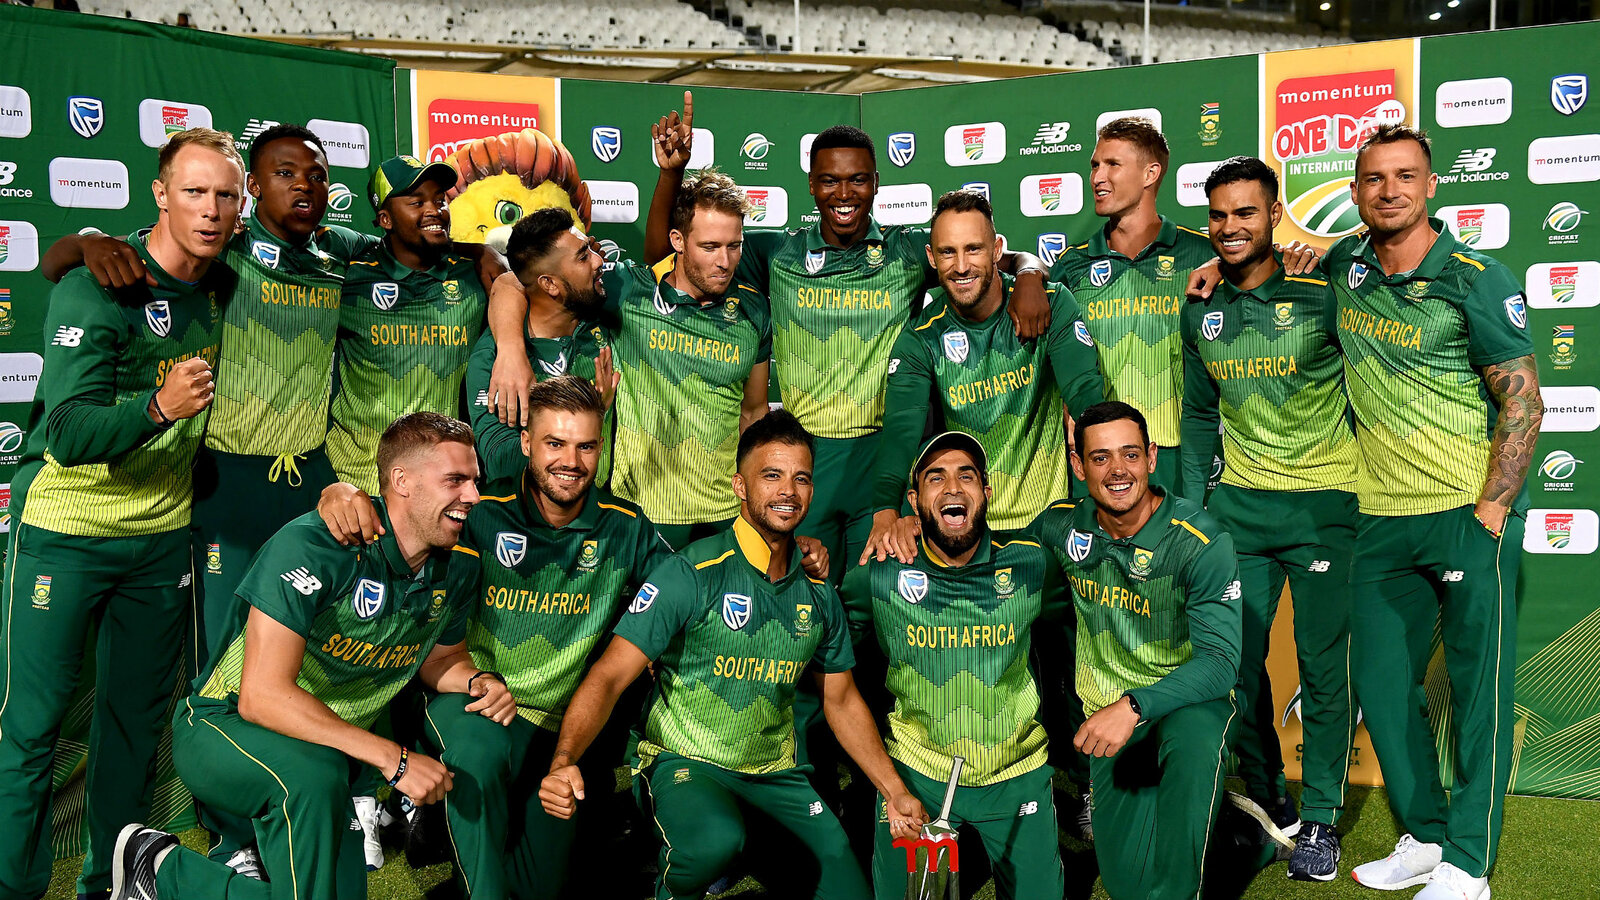 ICC Cricket World Cup 2019: South Africa Squad